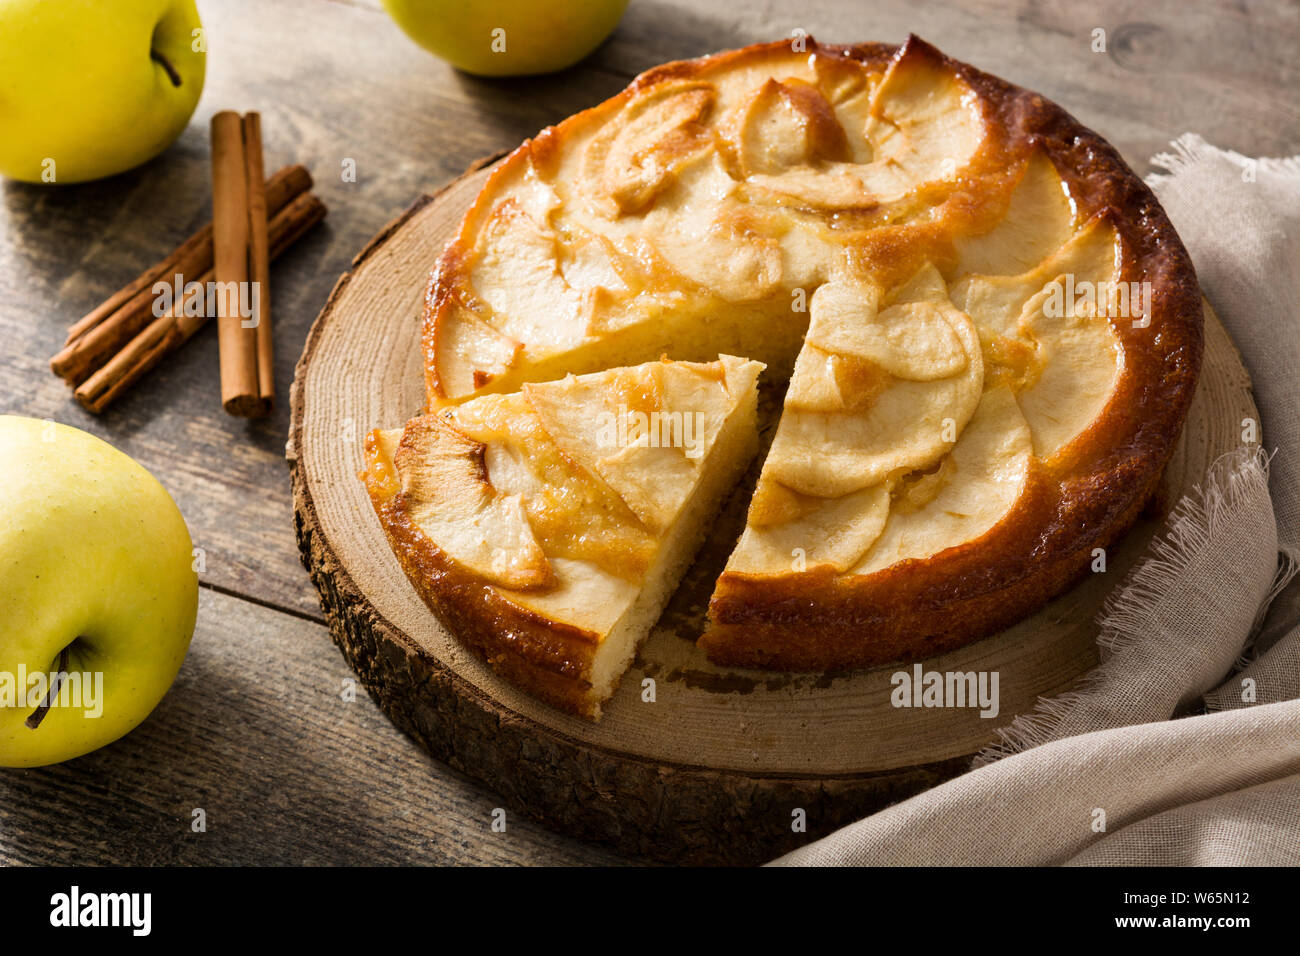 Homemade apple pie on wooden table. Stock Photo